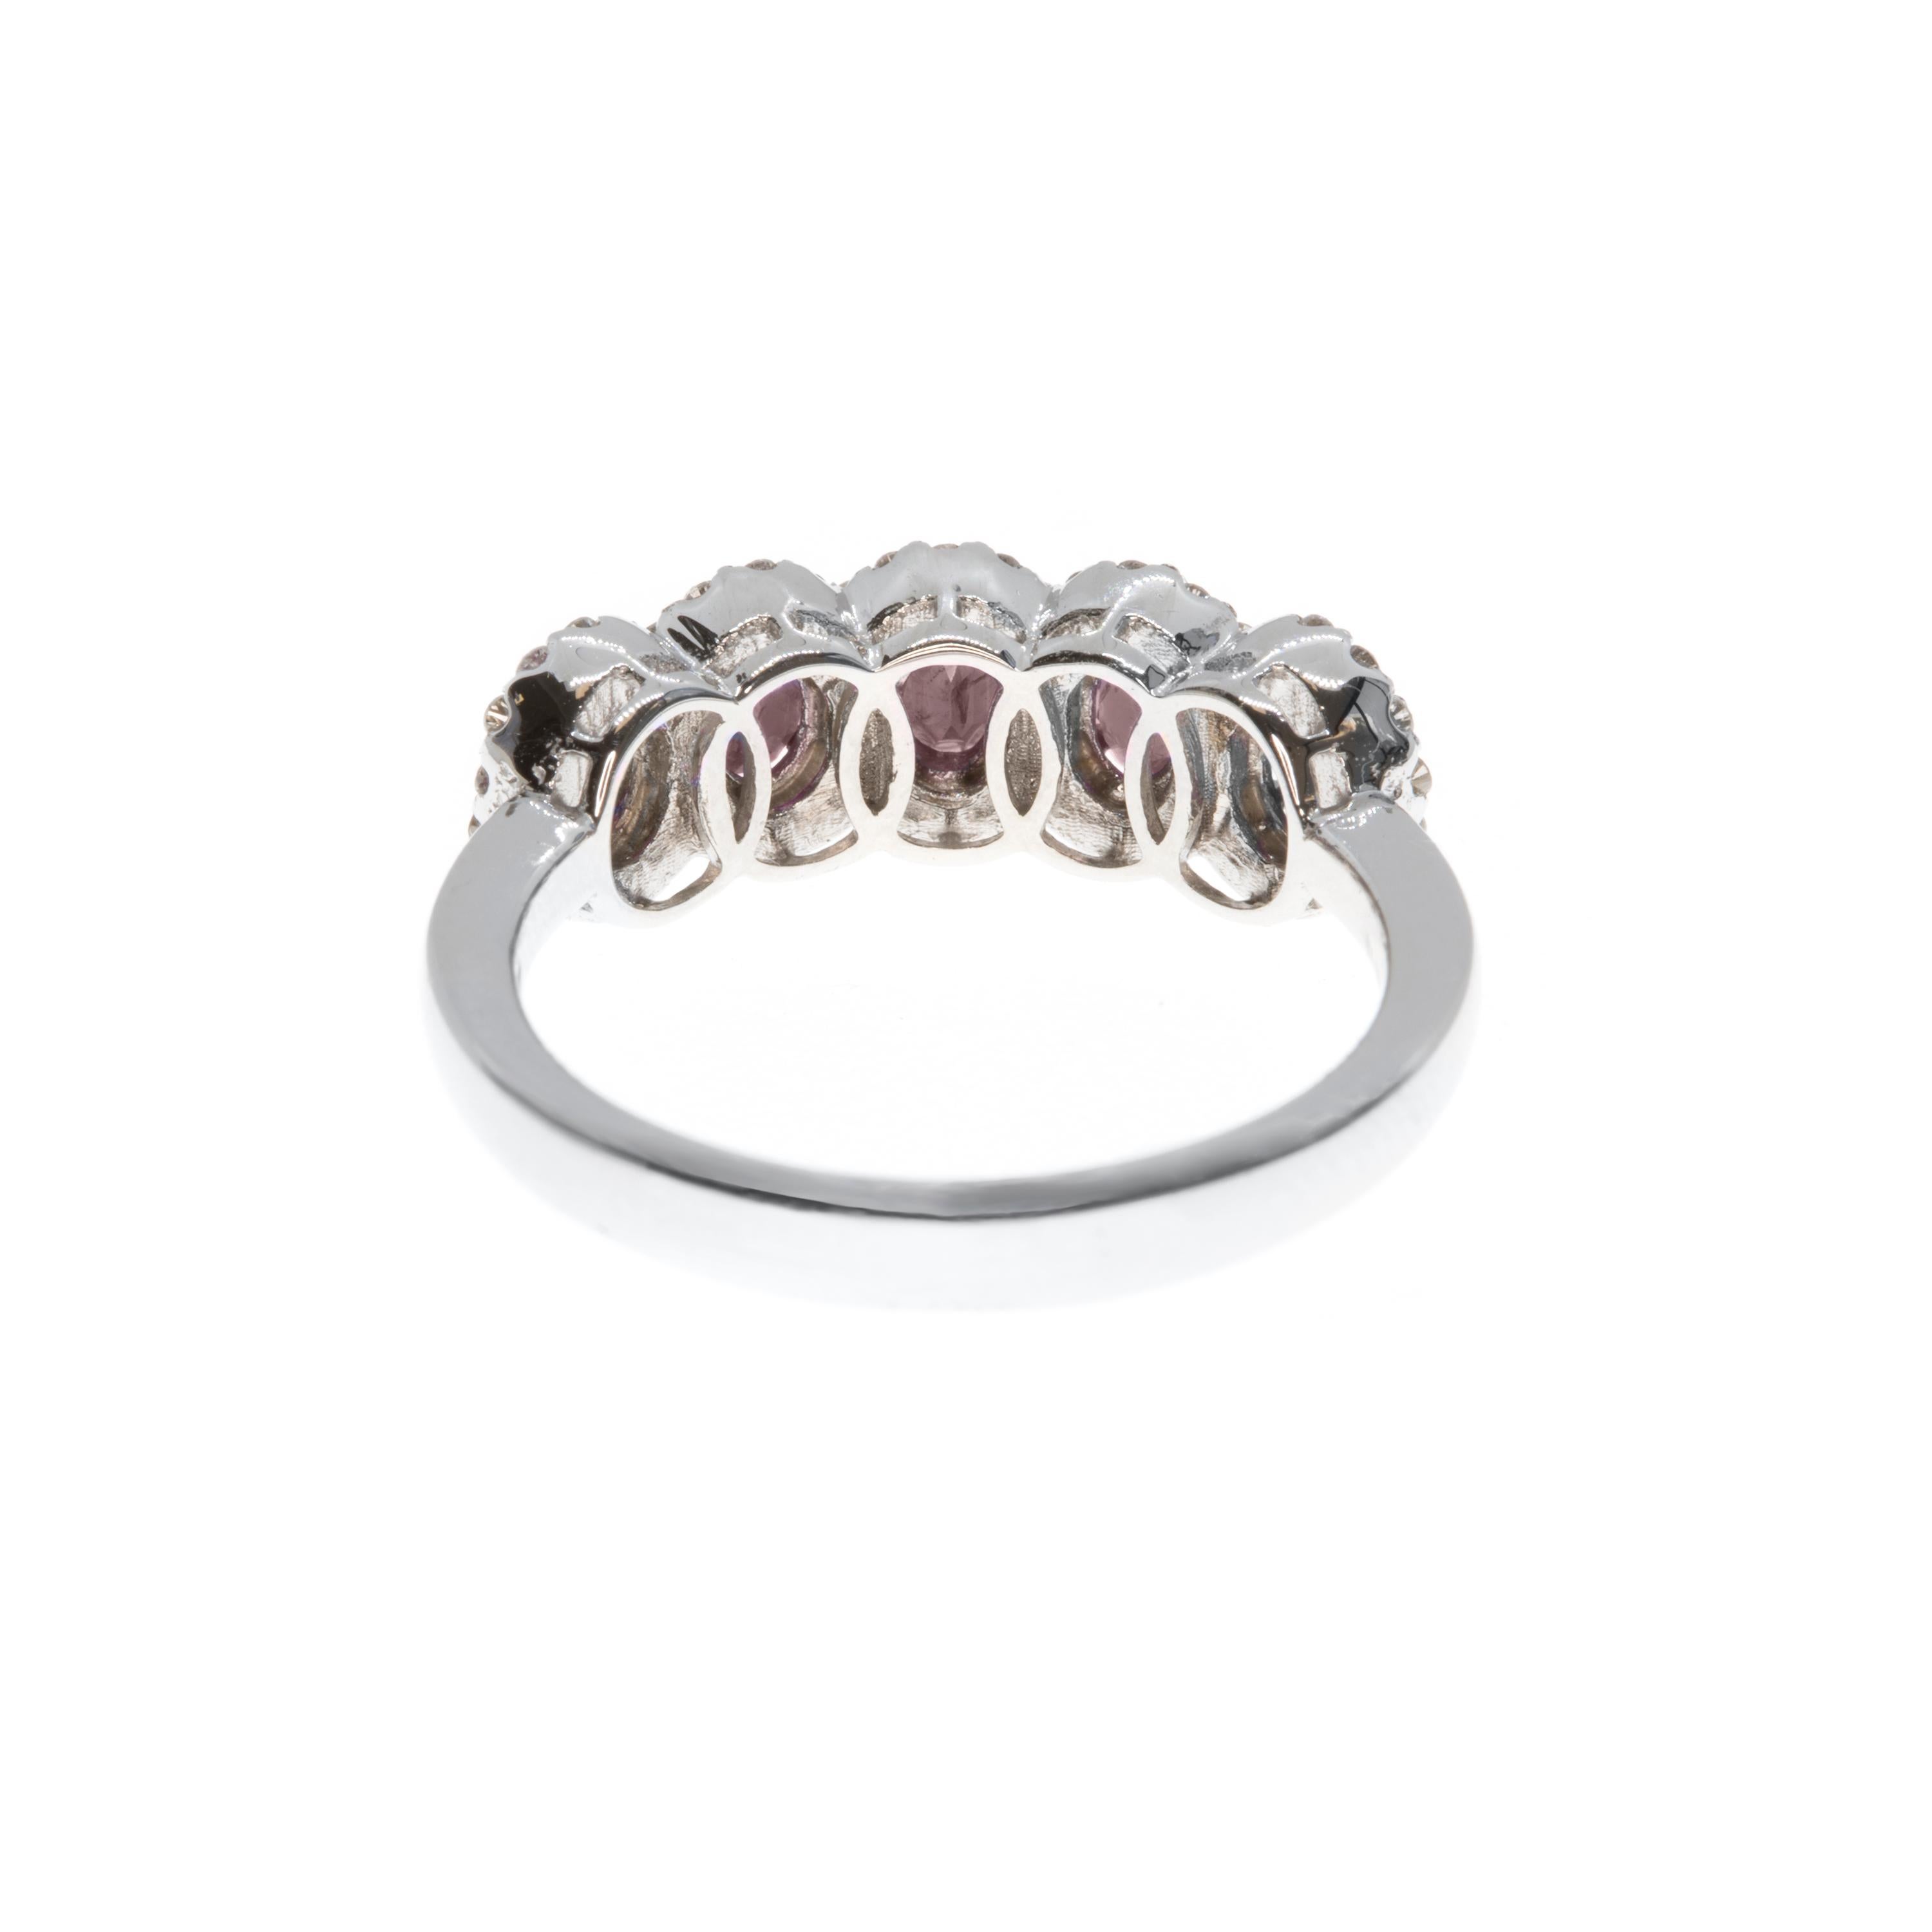 Contemporary 21st Century 18 Karat White Gold Diamond and Ruby Cocktail or Anniversary Ring For Sale